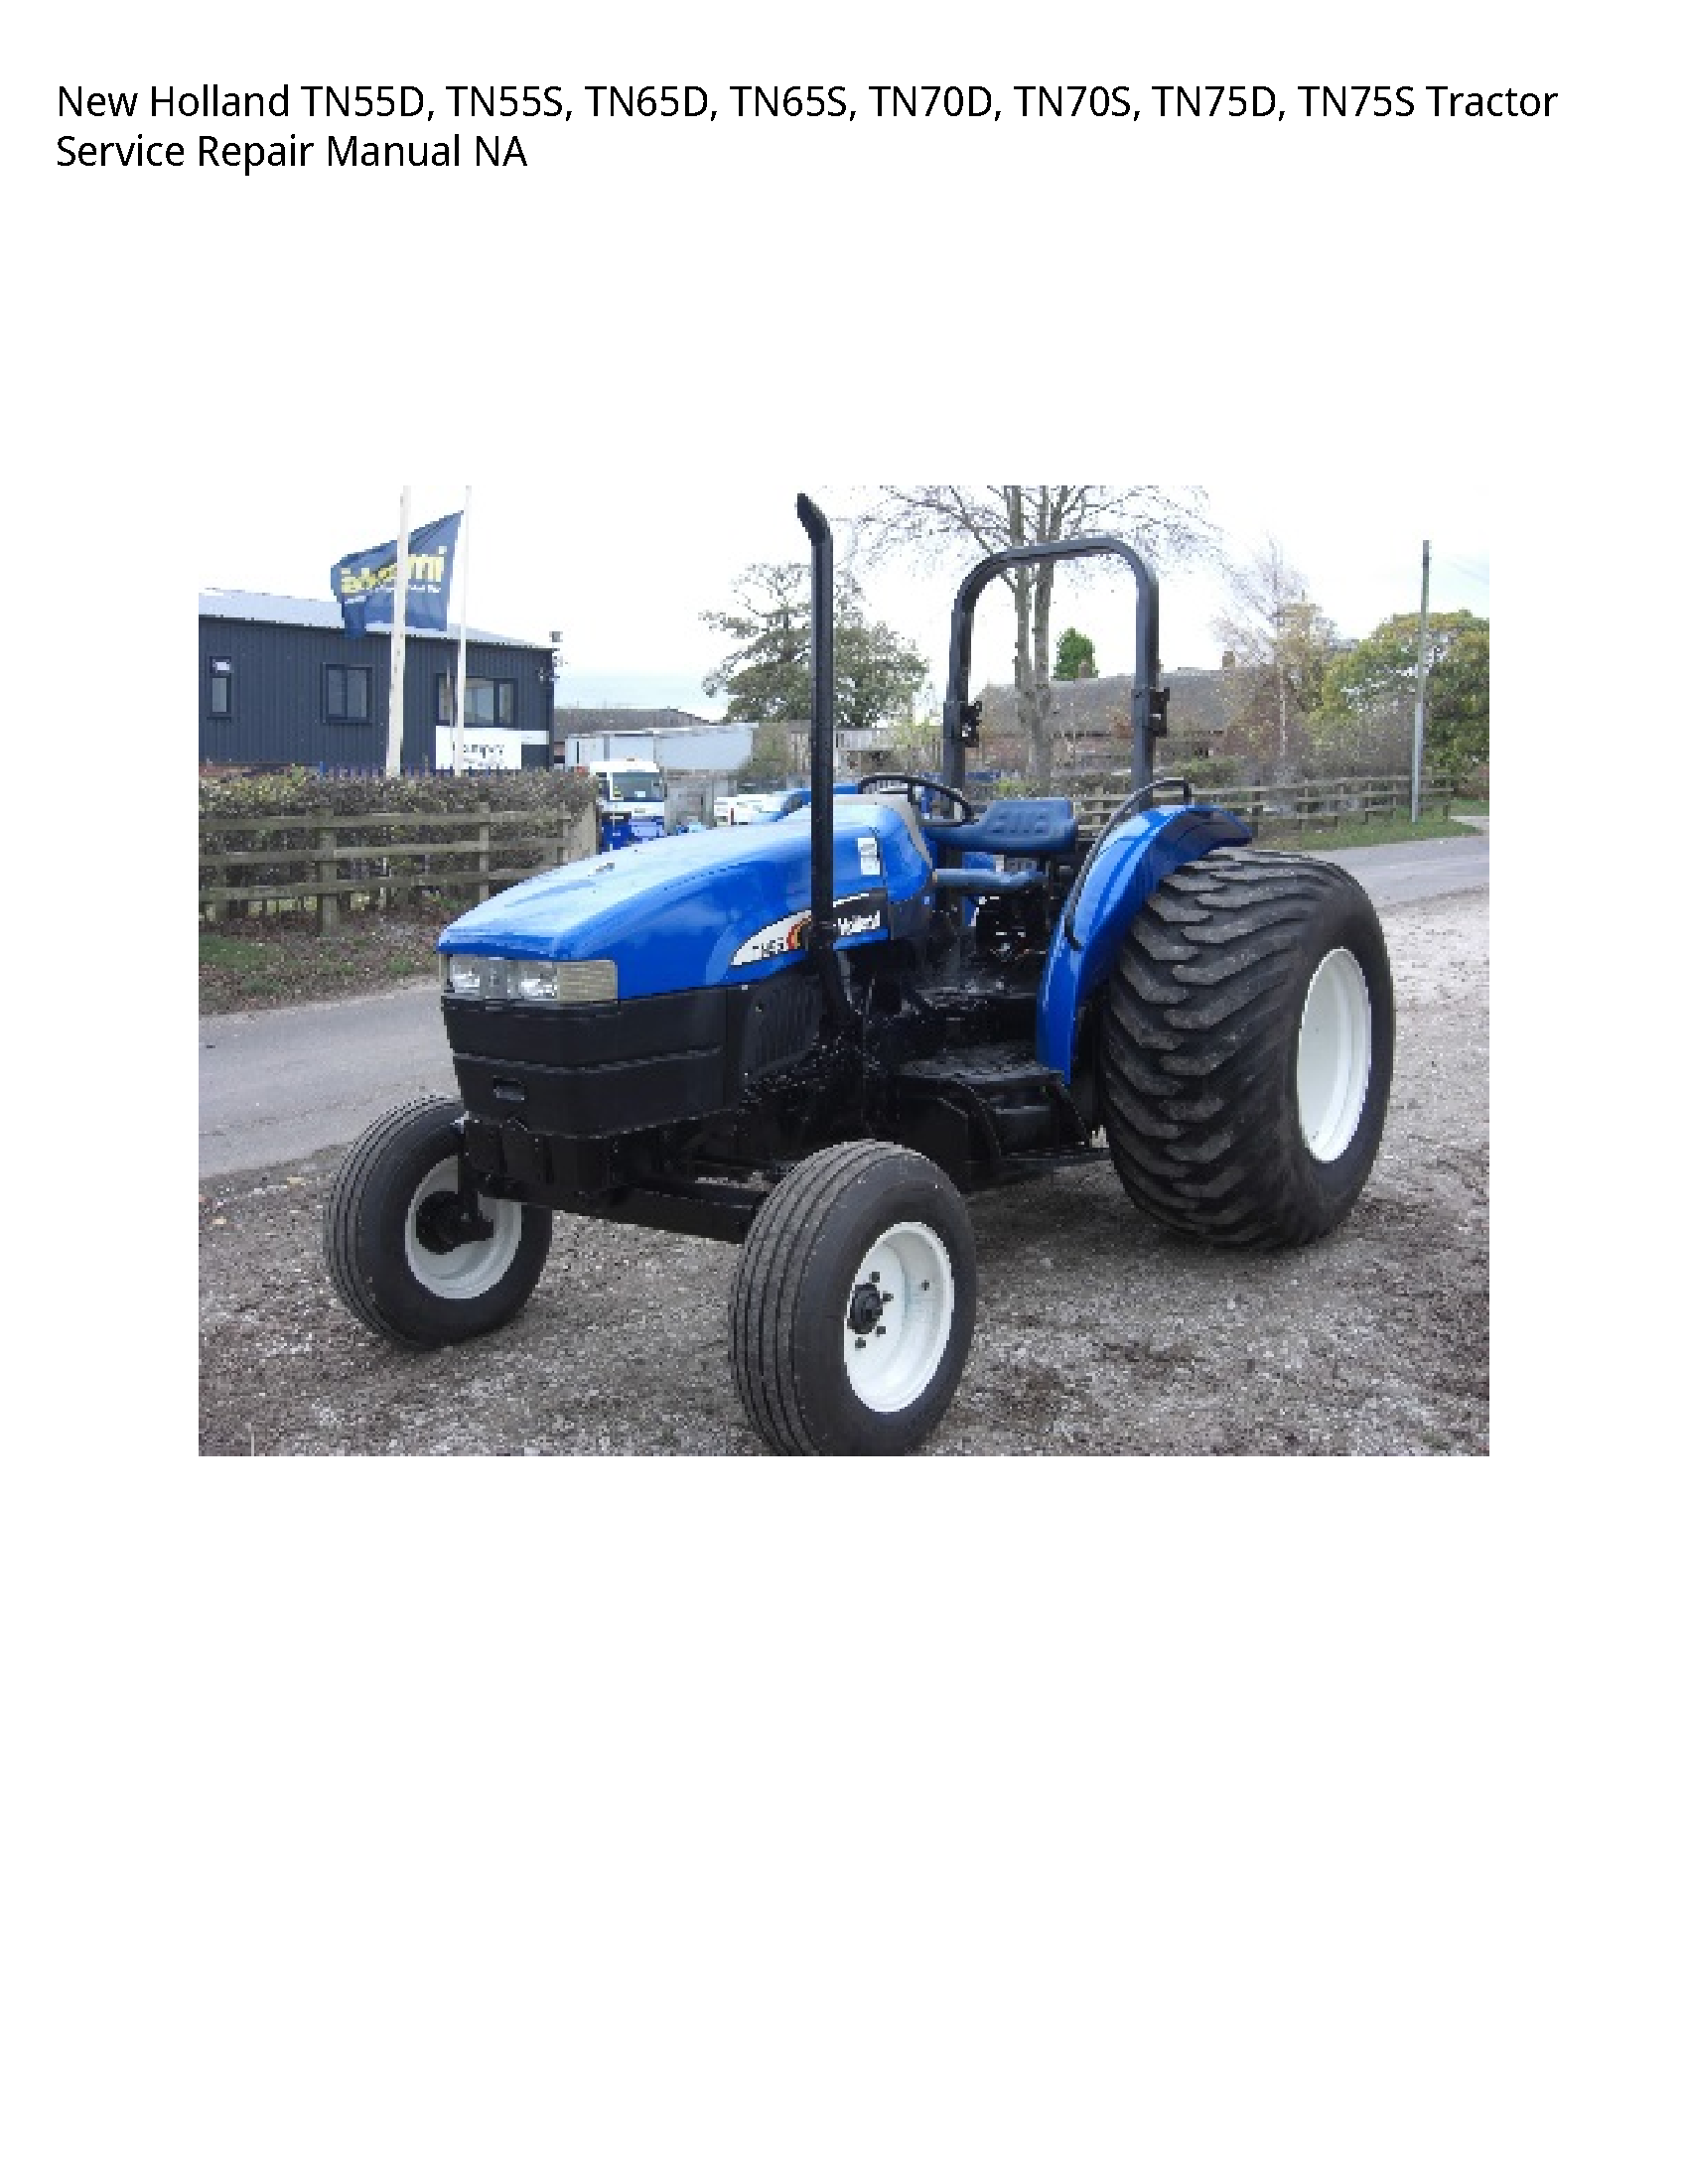 New Holland TN55D Tractor manual